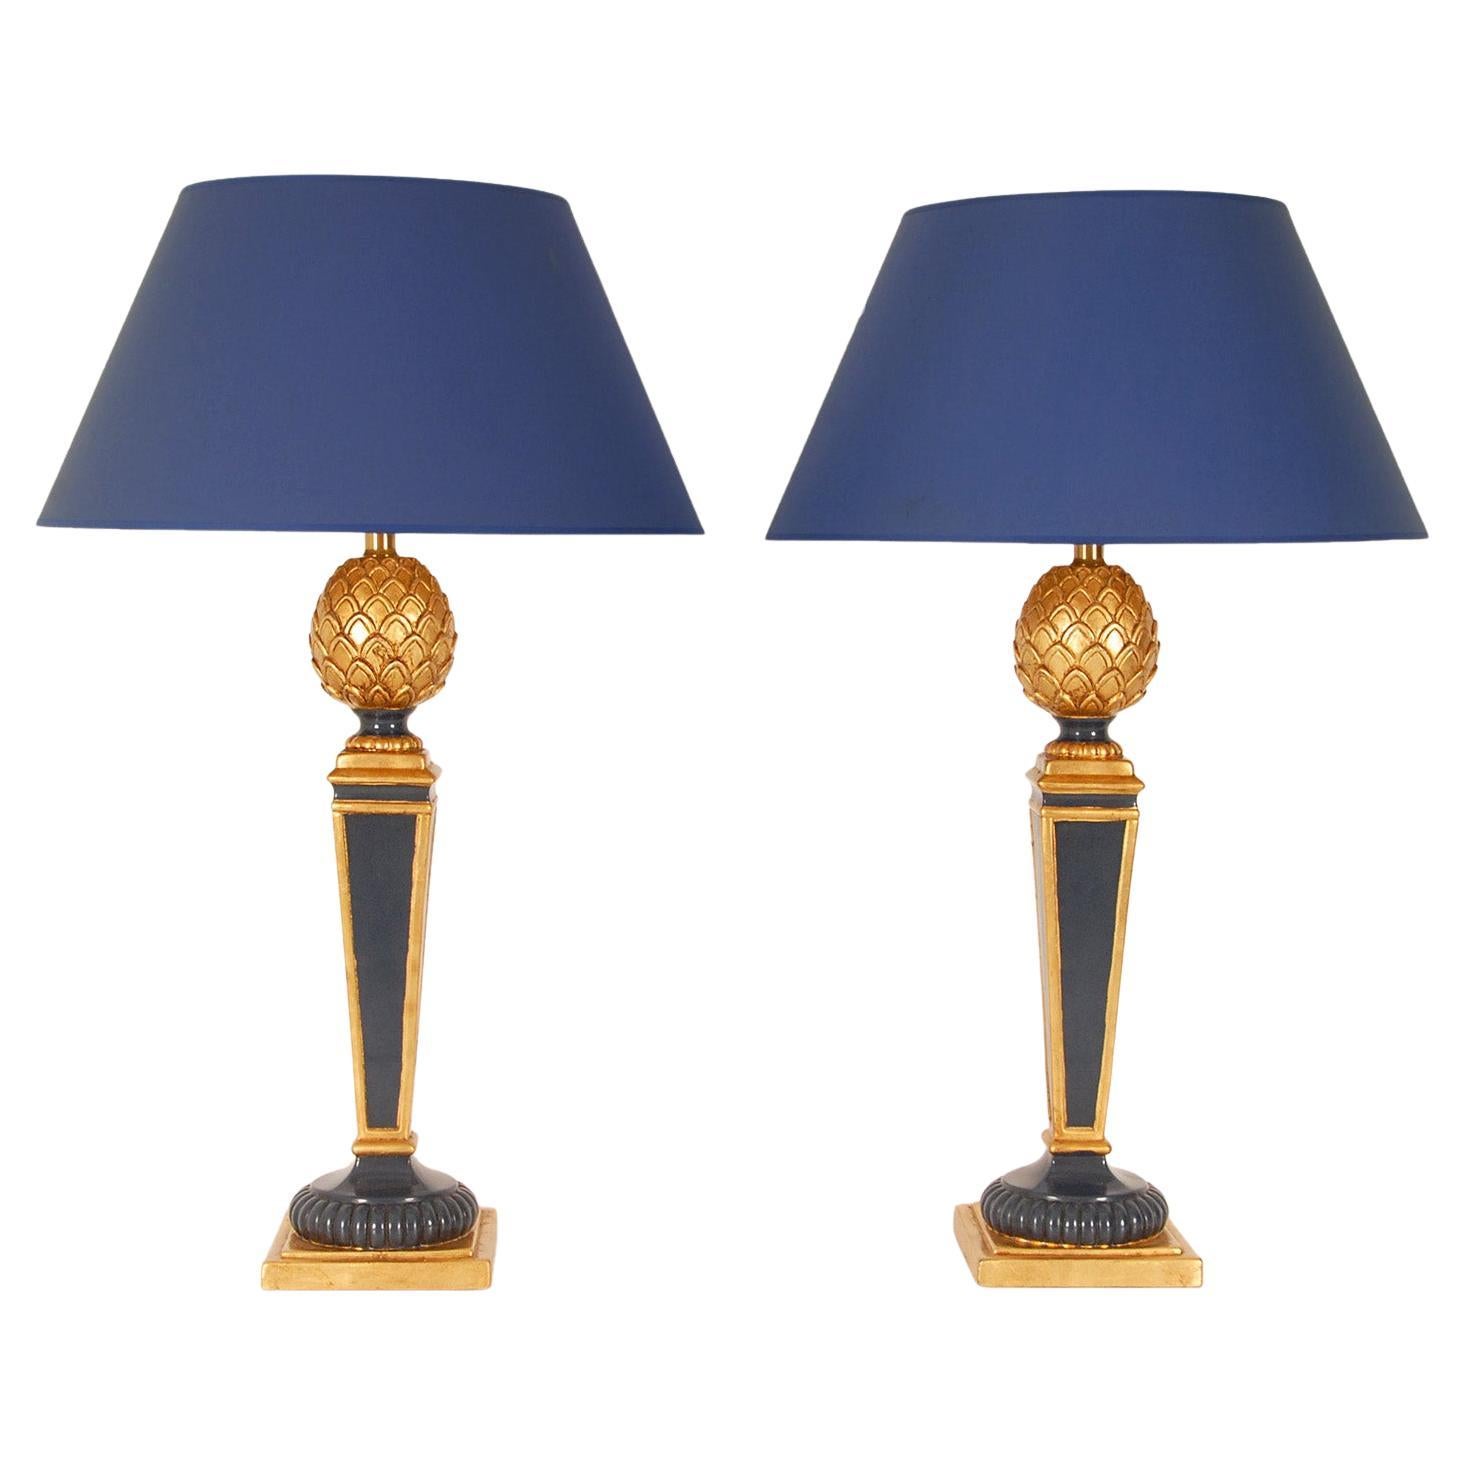 Vintage French High End Lamps Blue Gold Giltwood Pineapple Table Lamps, a Pair For Sale